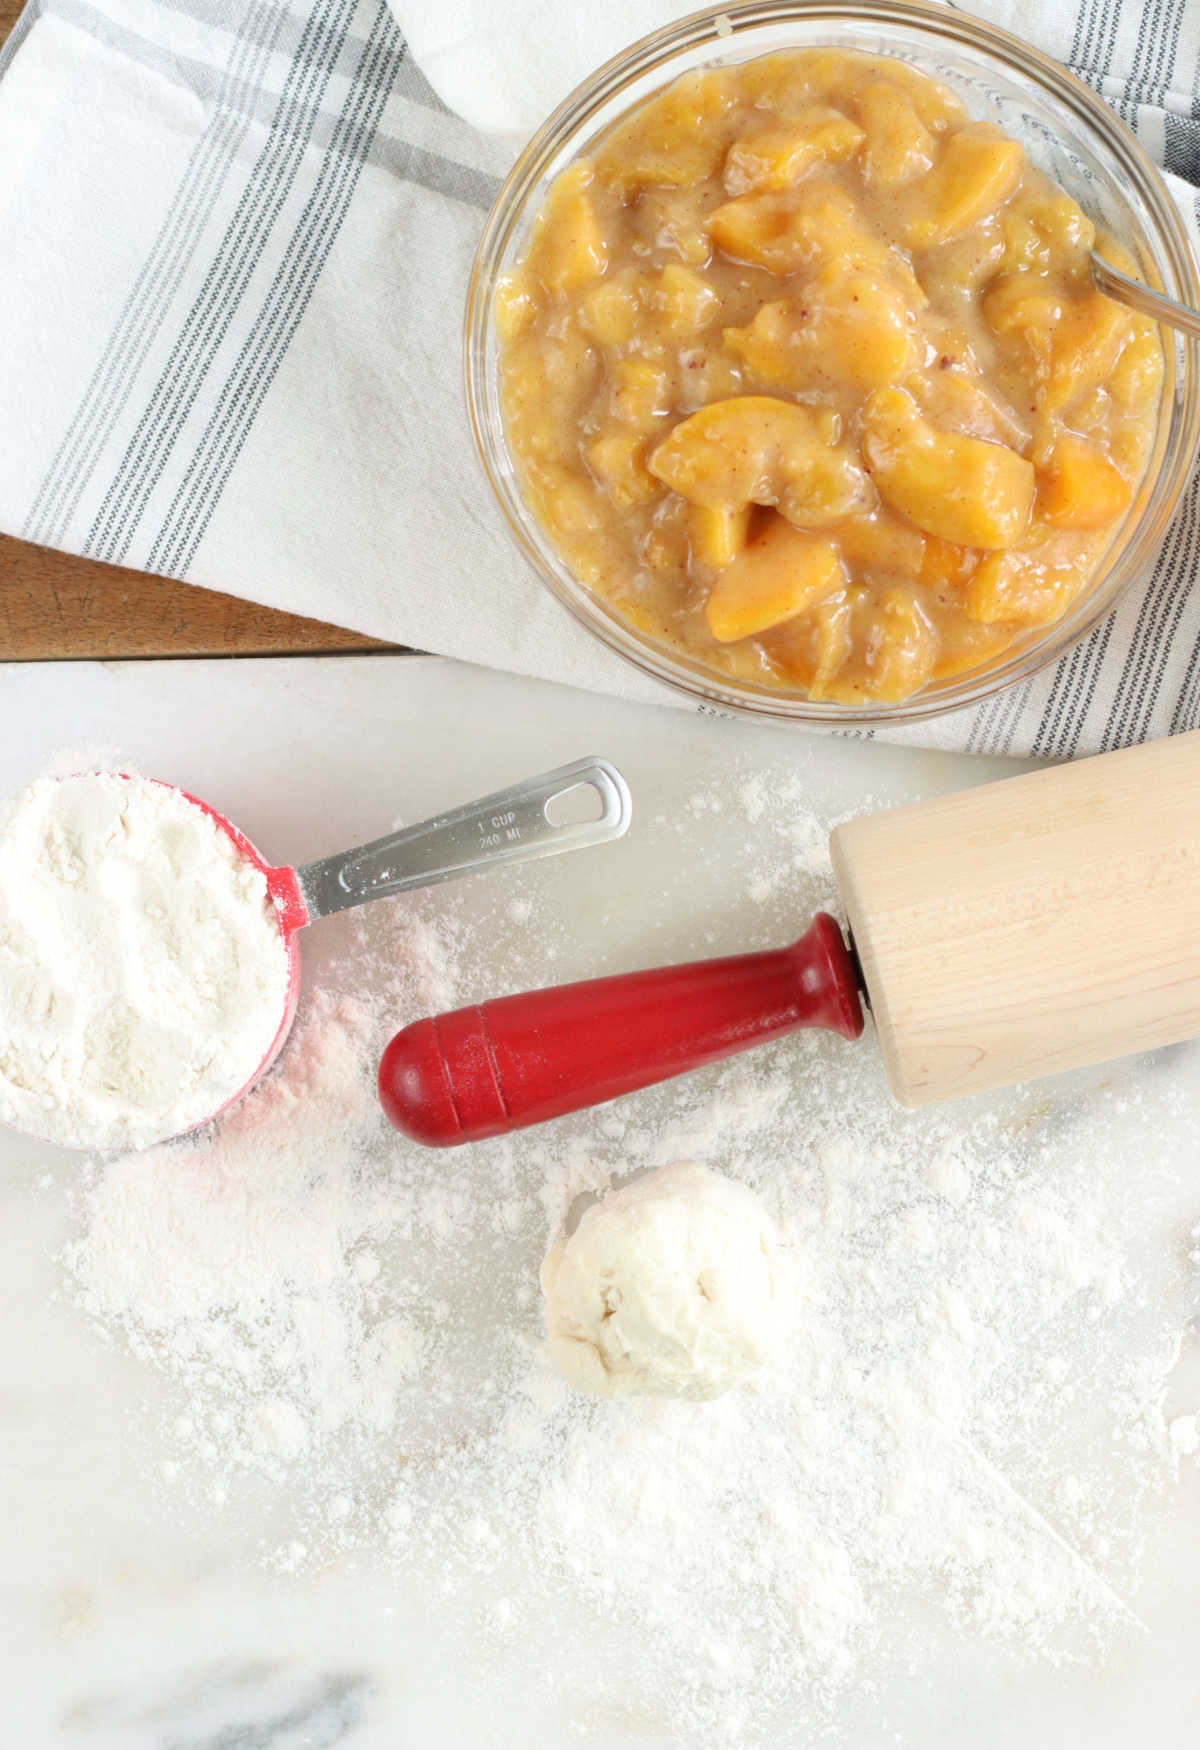 Pie crust round, peach pie filling in clear glass bowl, wooden rolling pin with red handles on white marble.